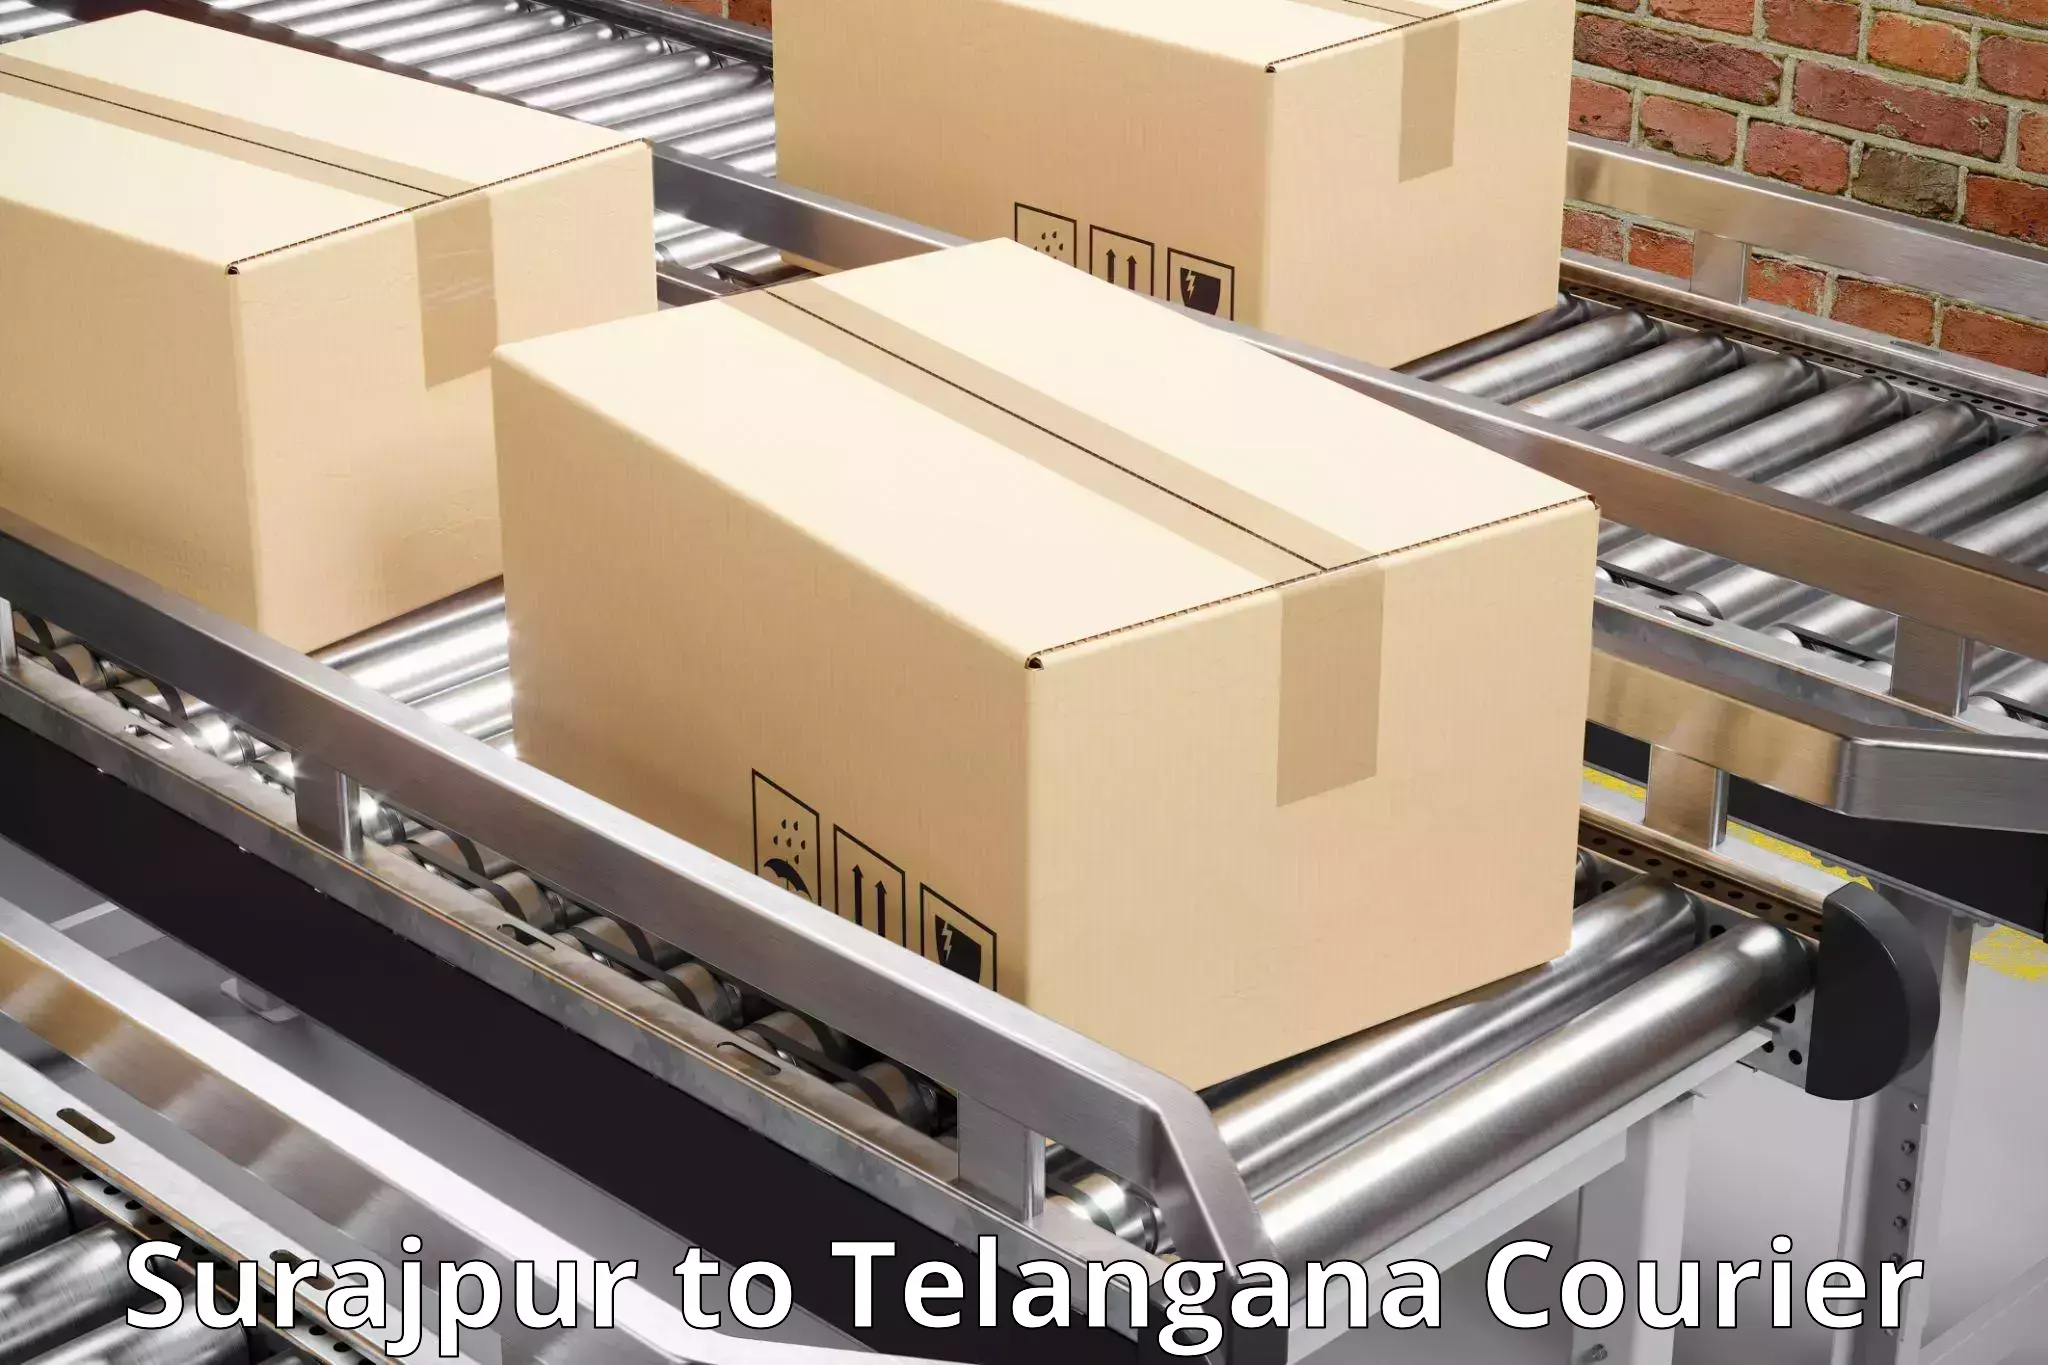 Professional courier handling Surajpur to Hyderabad